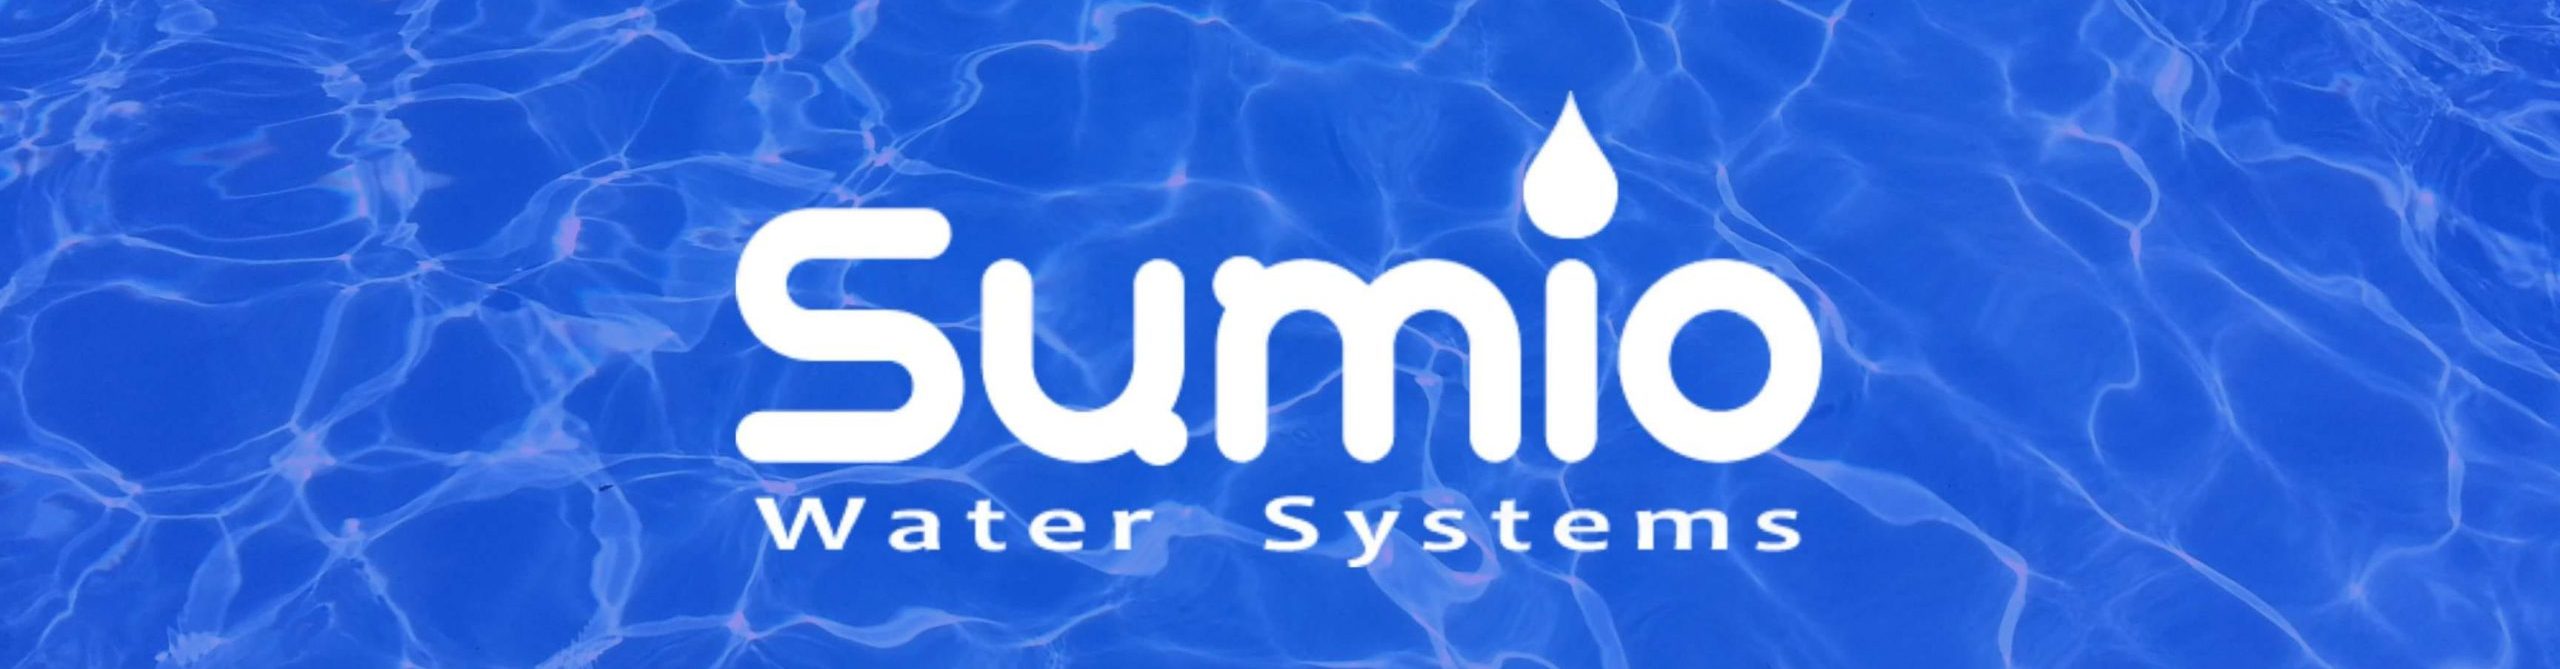 Sumio Water Systems Logotype